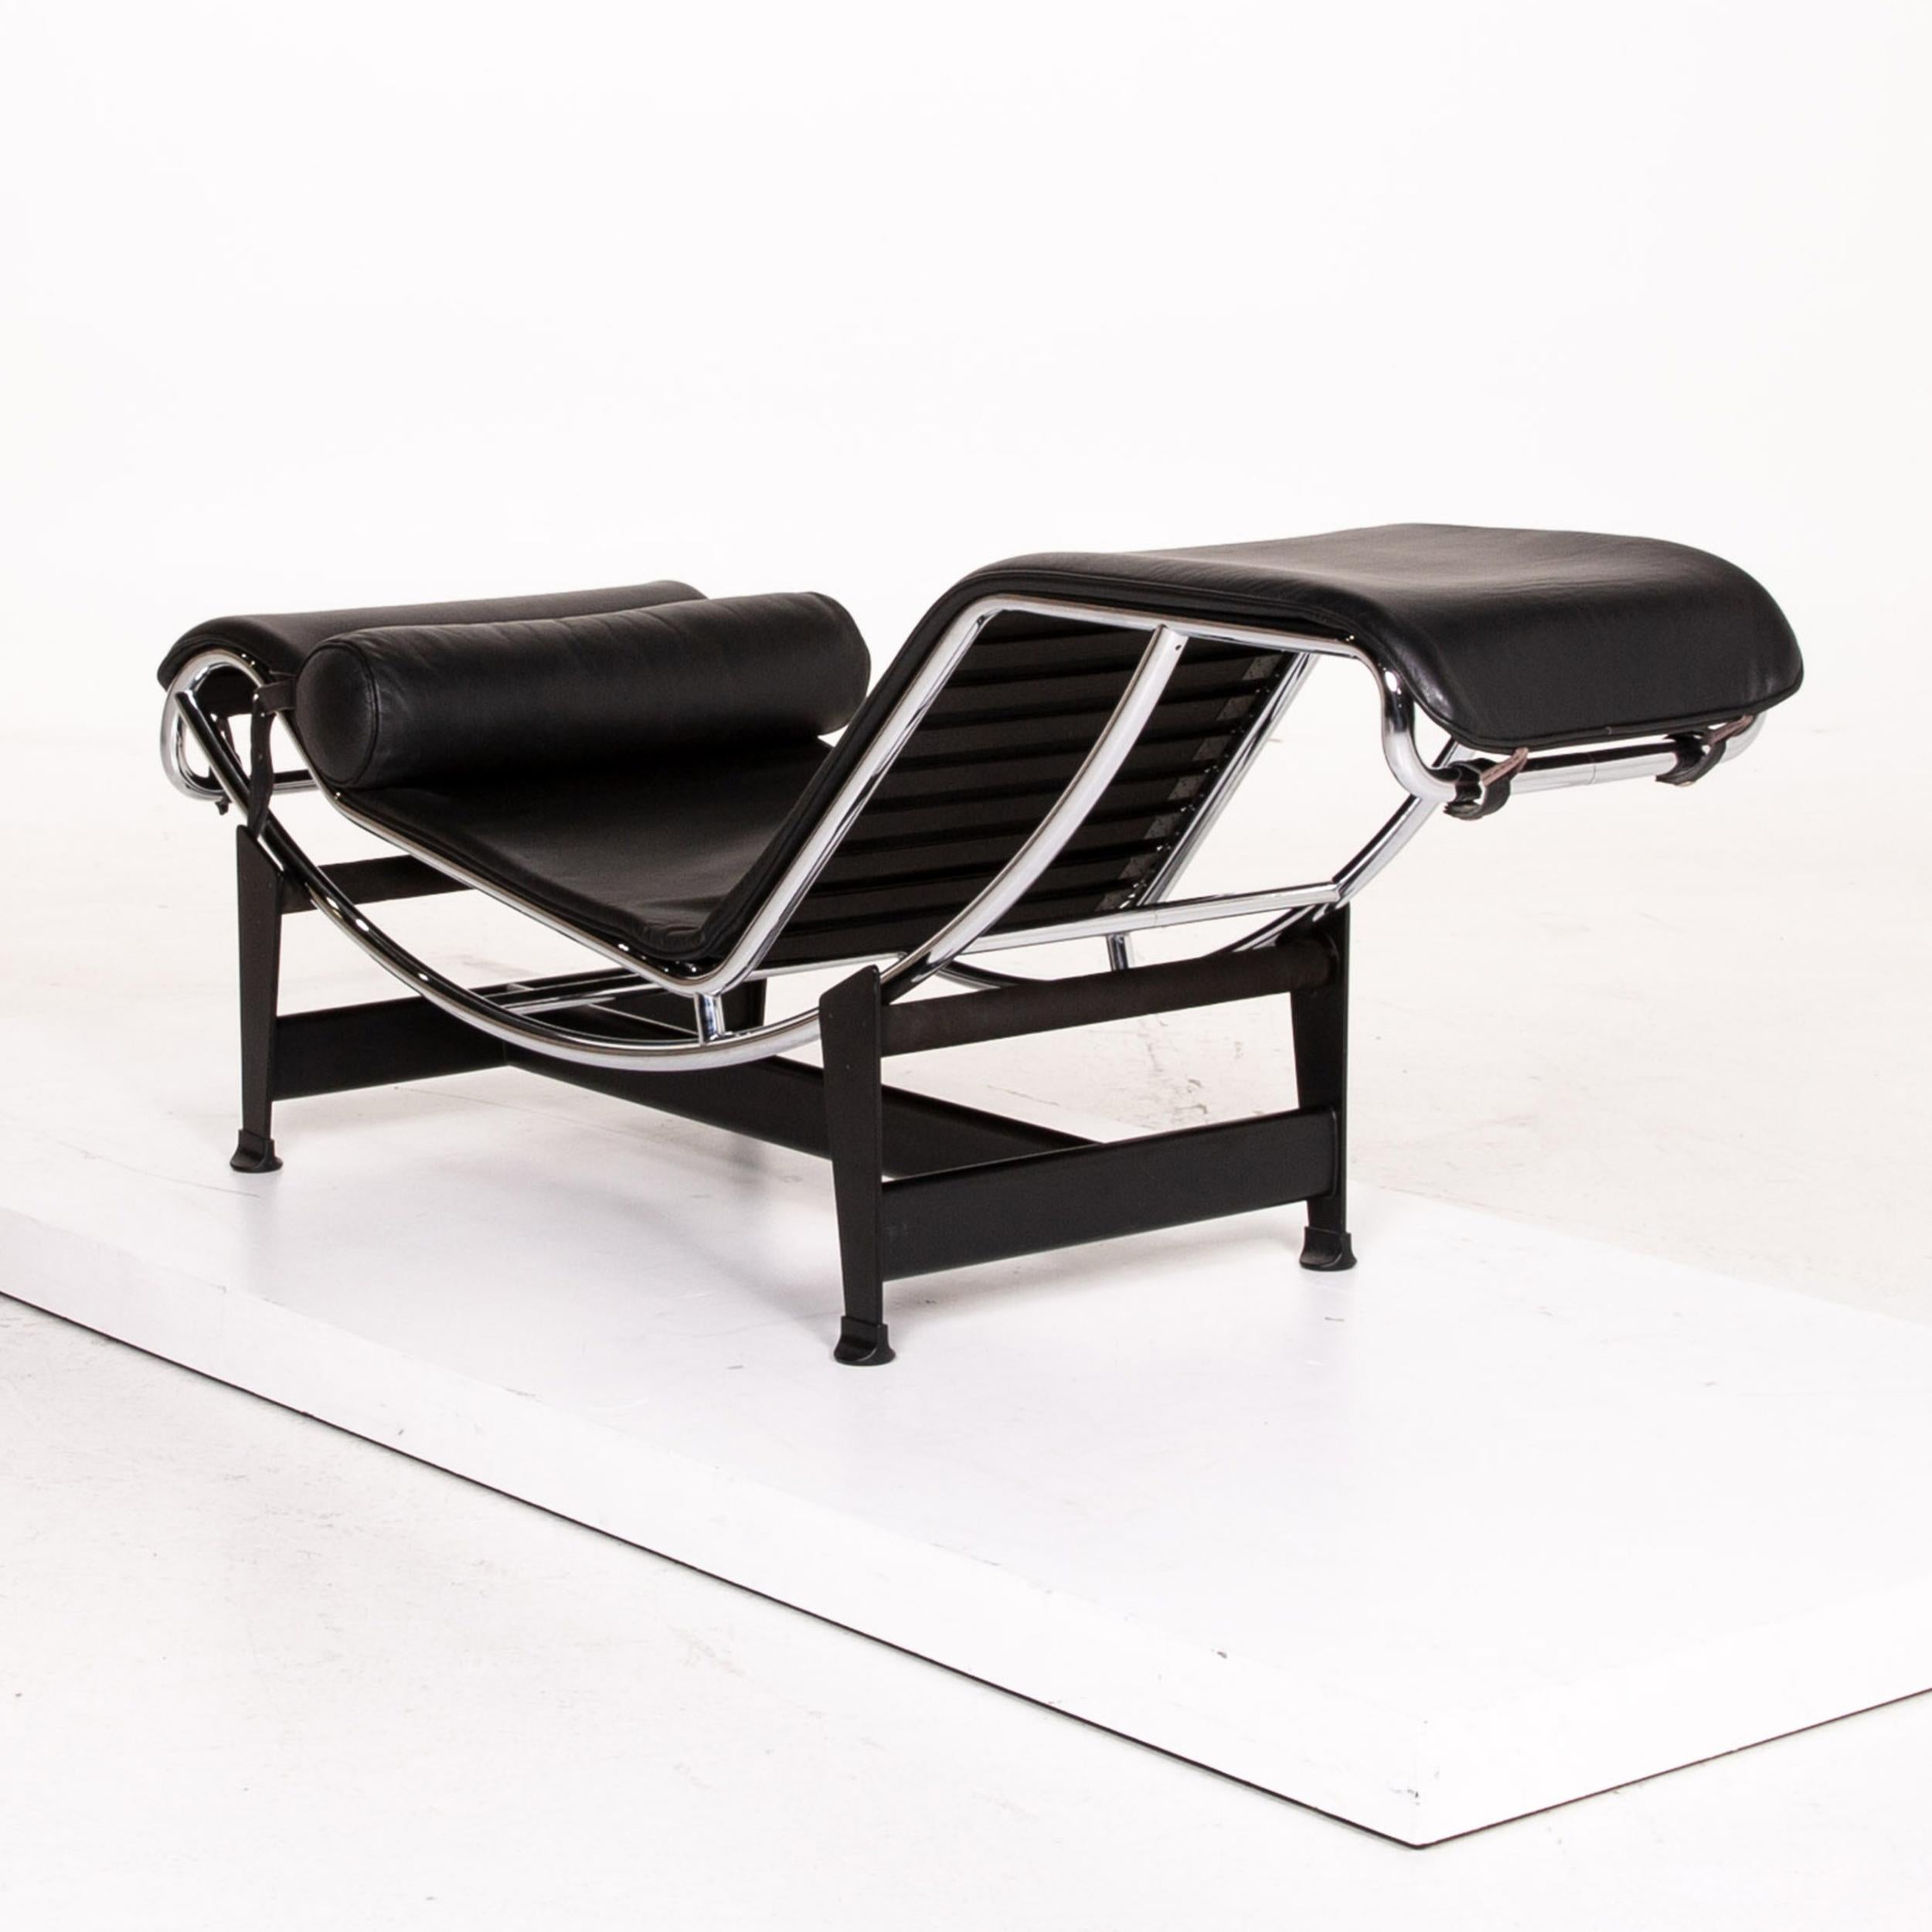 Modern Cassina Le Corbusier LC 4 Leather Lounger Black Function Relaxation Function For Sale